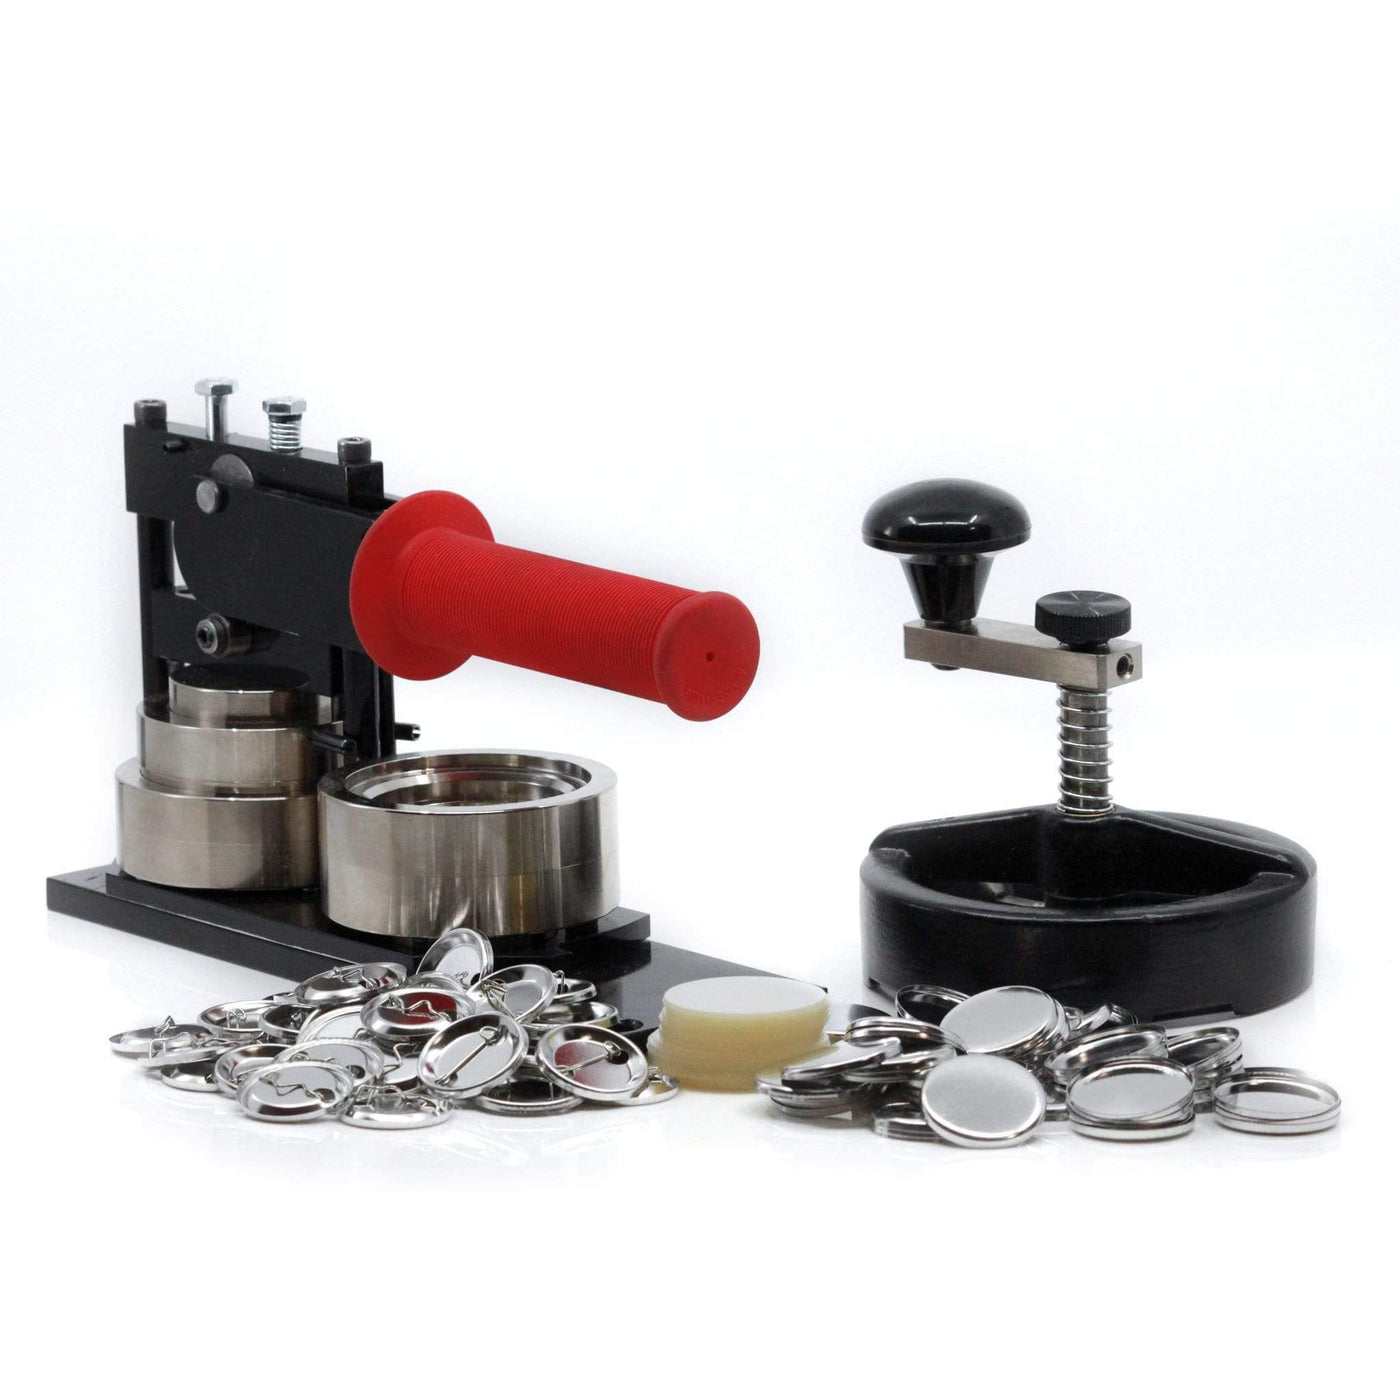 Model 225, 2-1/4" Button Making starter kit with button machine, cutter and pinback sets